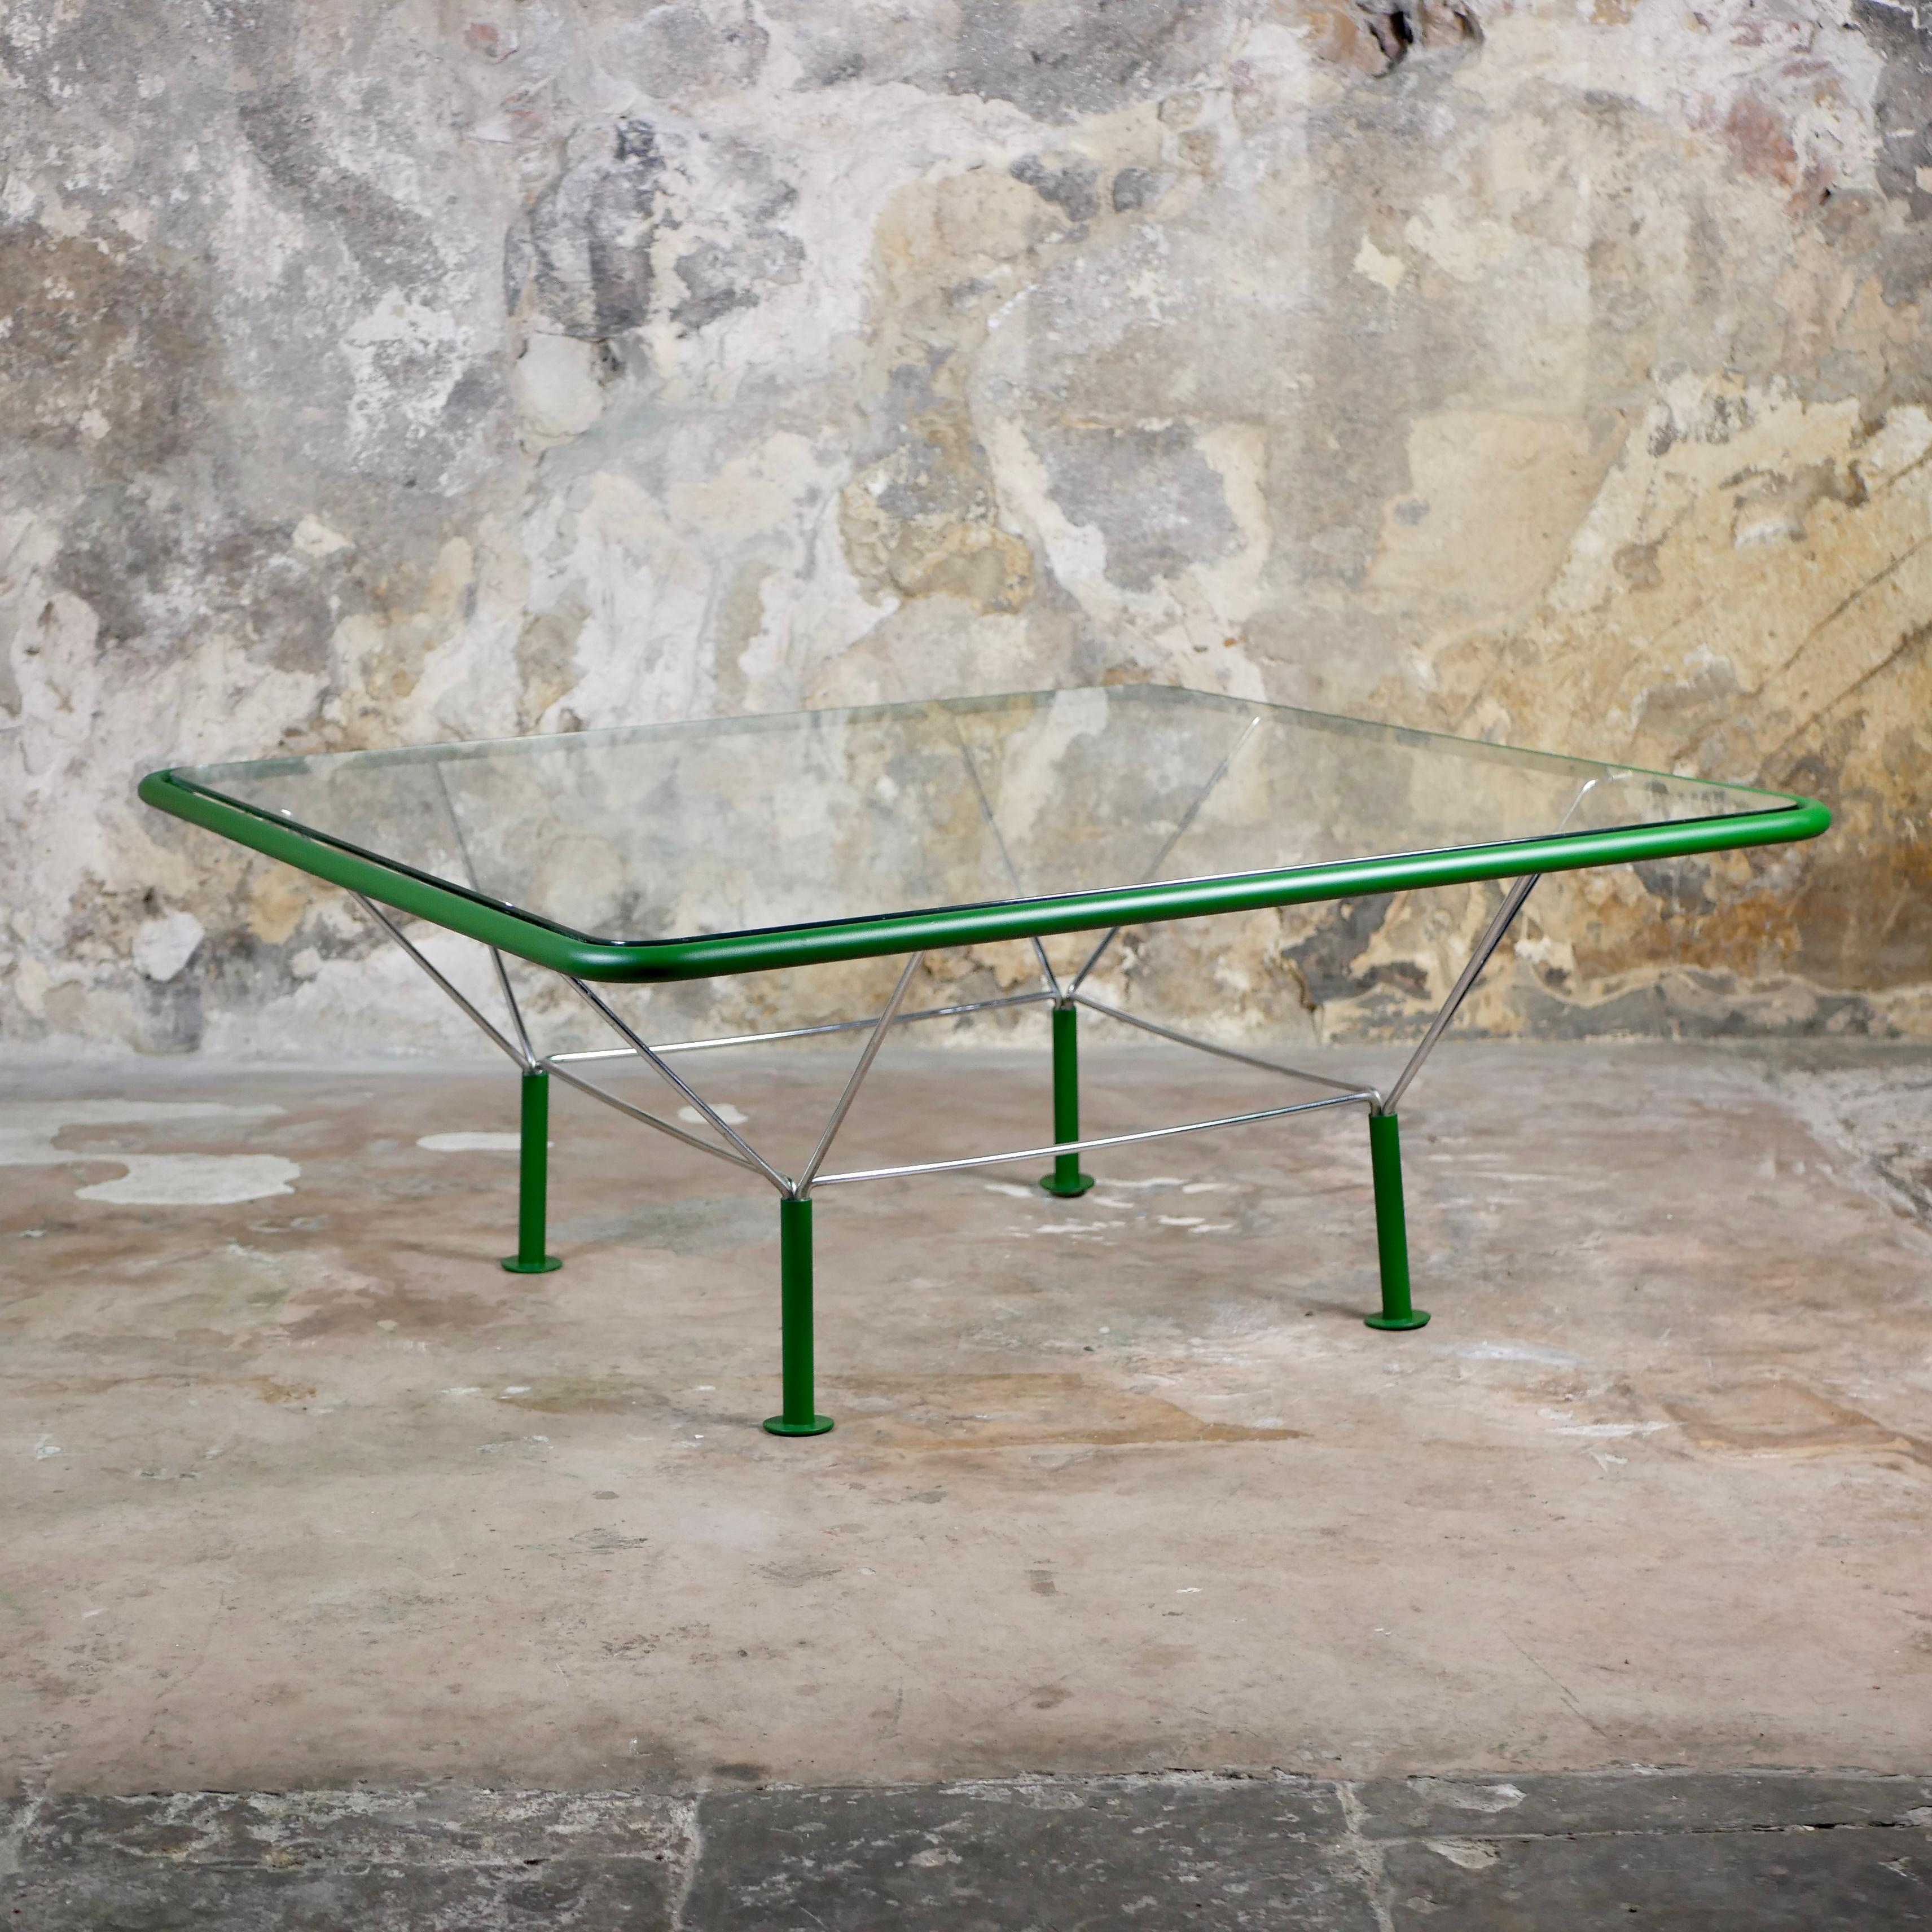 Beautiful and rare coffee table by Niels Bendtsen, made in Denmark in the 1970s.
Refinished tubular metal structure, glass top.
Good condition, some scratches on top.
Dimensions : W100, D100, H40